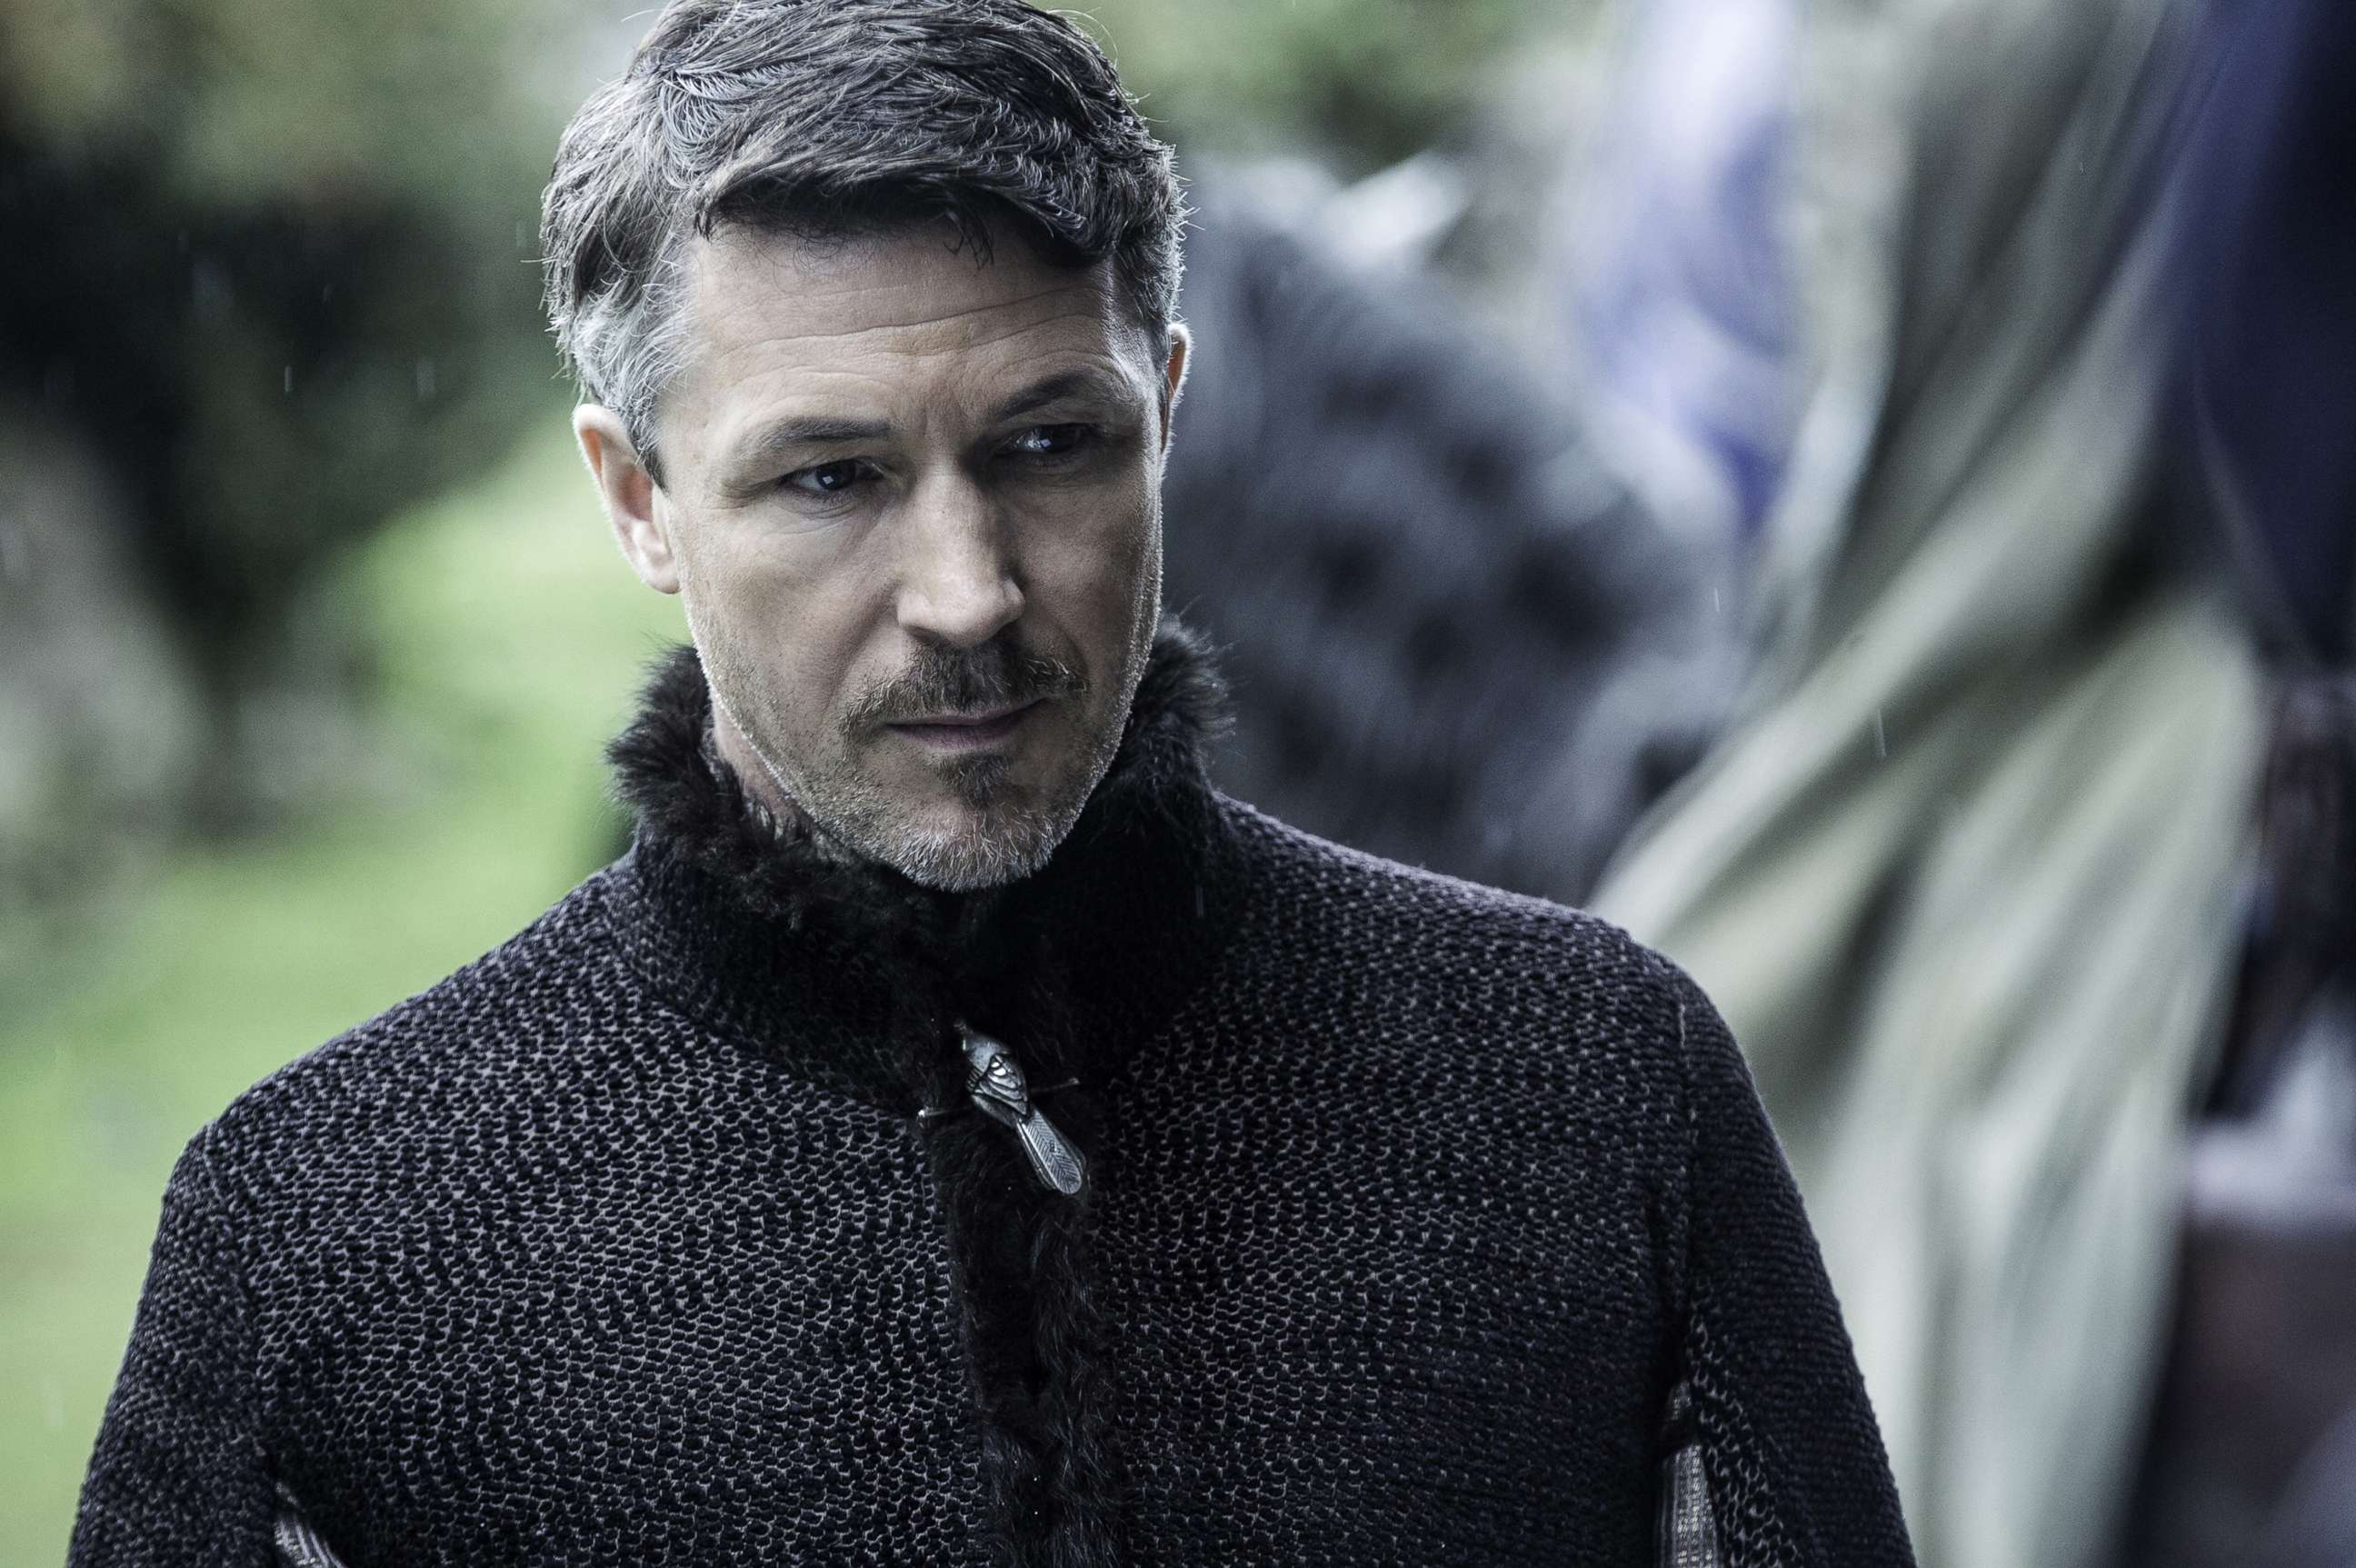 PHOTO: Aiden Gillan portrays the character Littlefinger in "Game of Thrones."